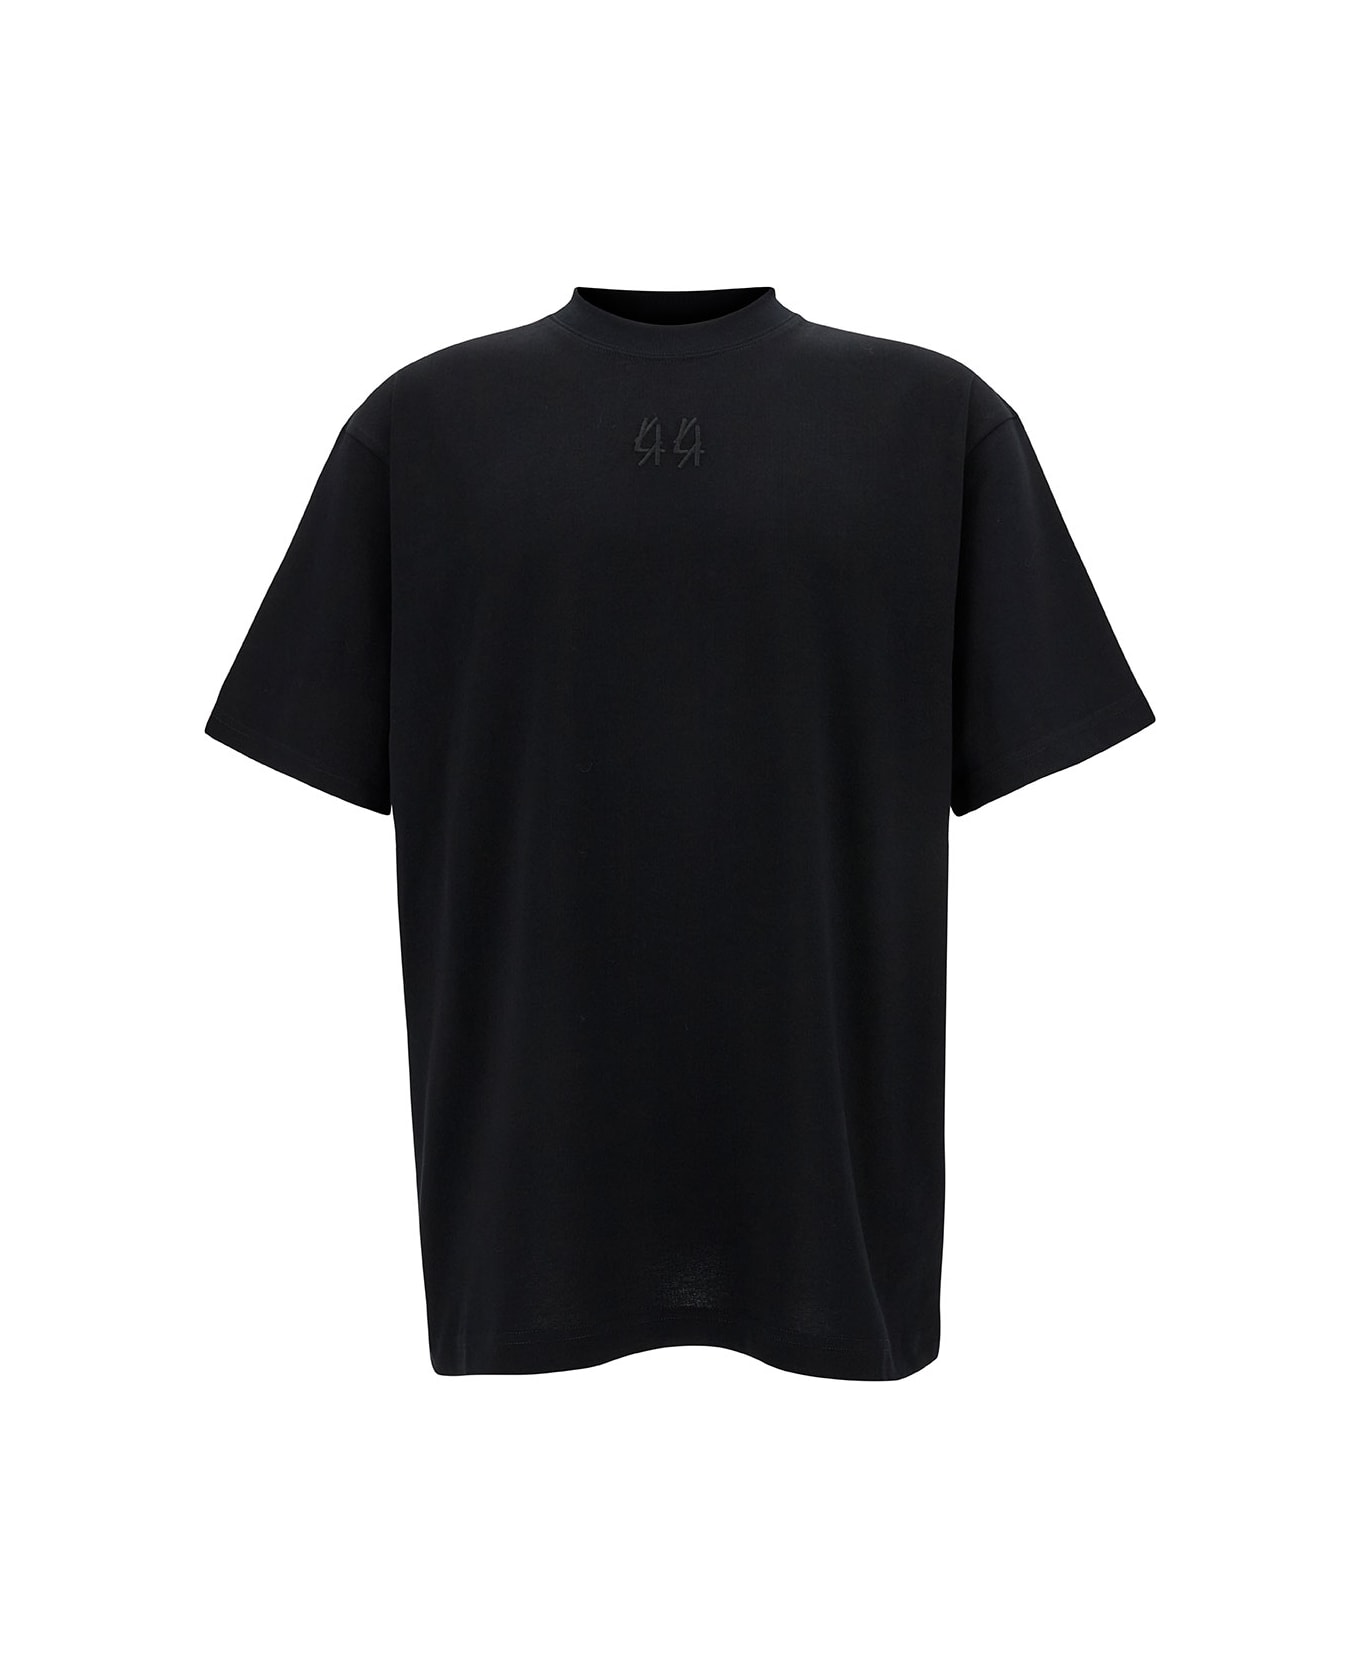 44 Label Group Black T-shirt With Logo Embroidery And Print In Cotton Man T-Shirt - BLACK シャツ